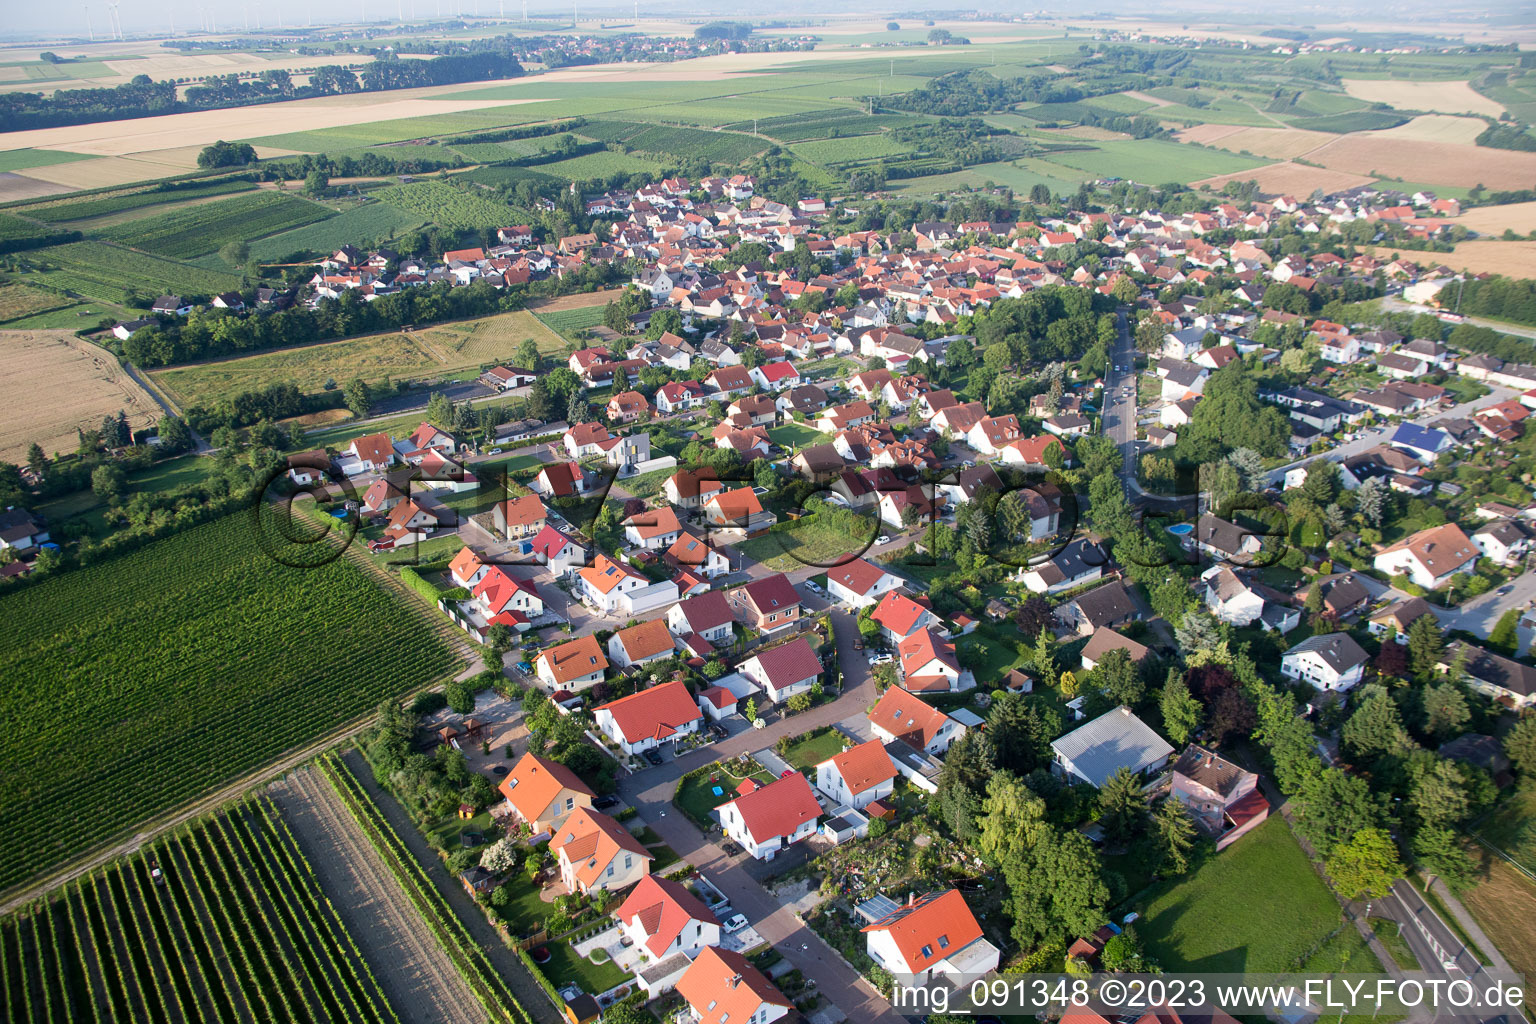 Dalheim in the state Rhineland-Palatinate, Germany seen from above